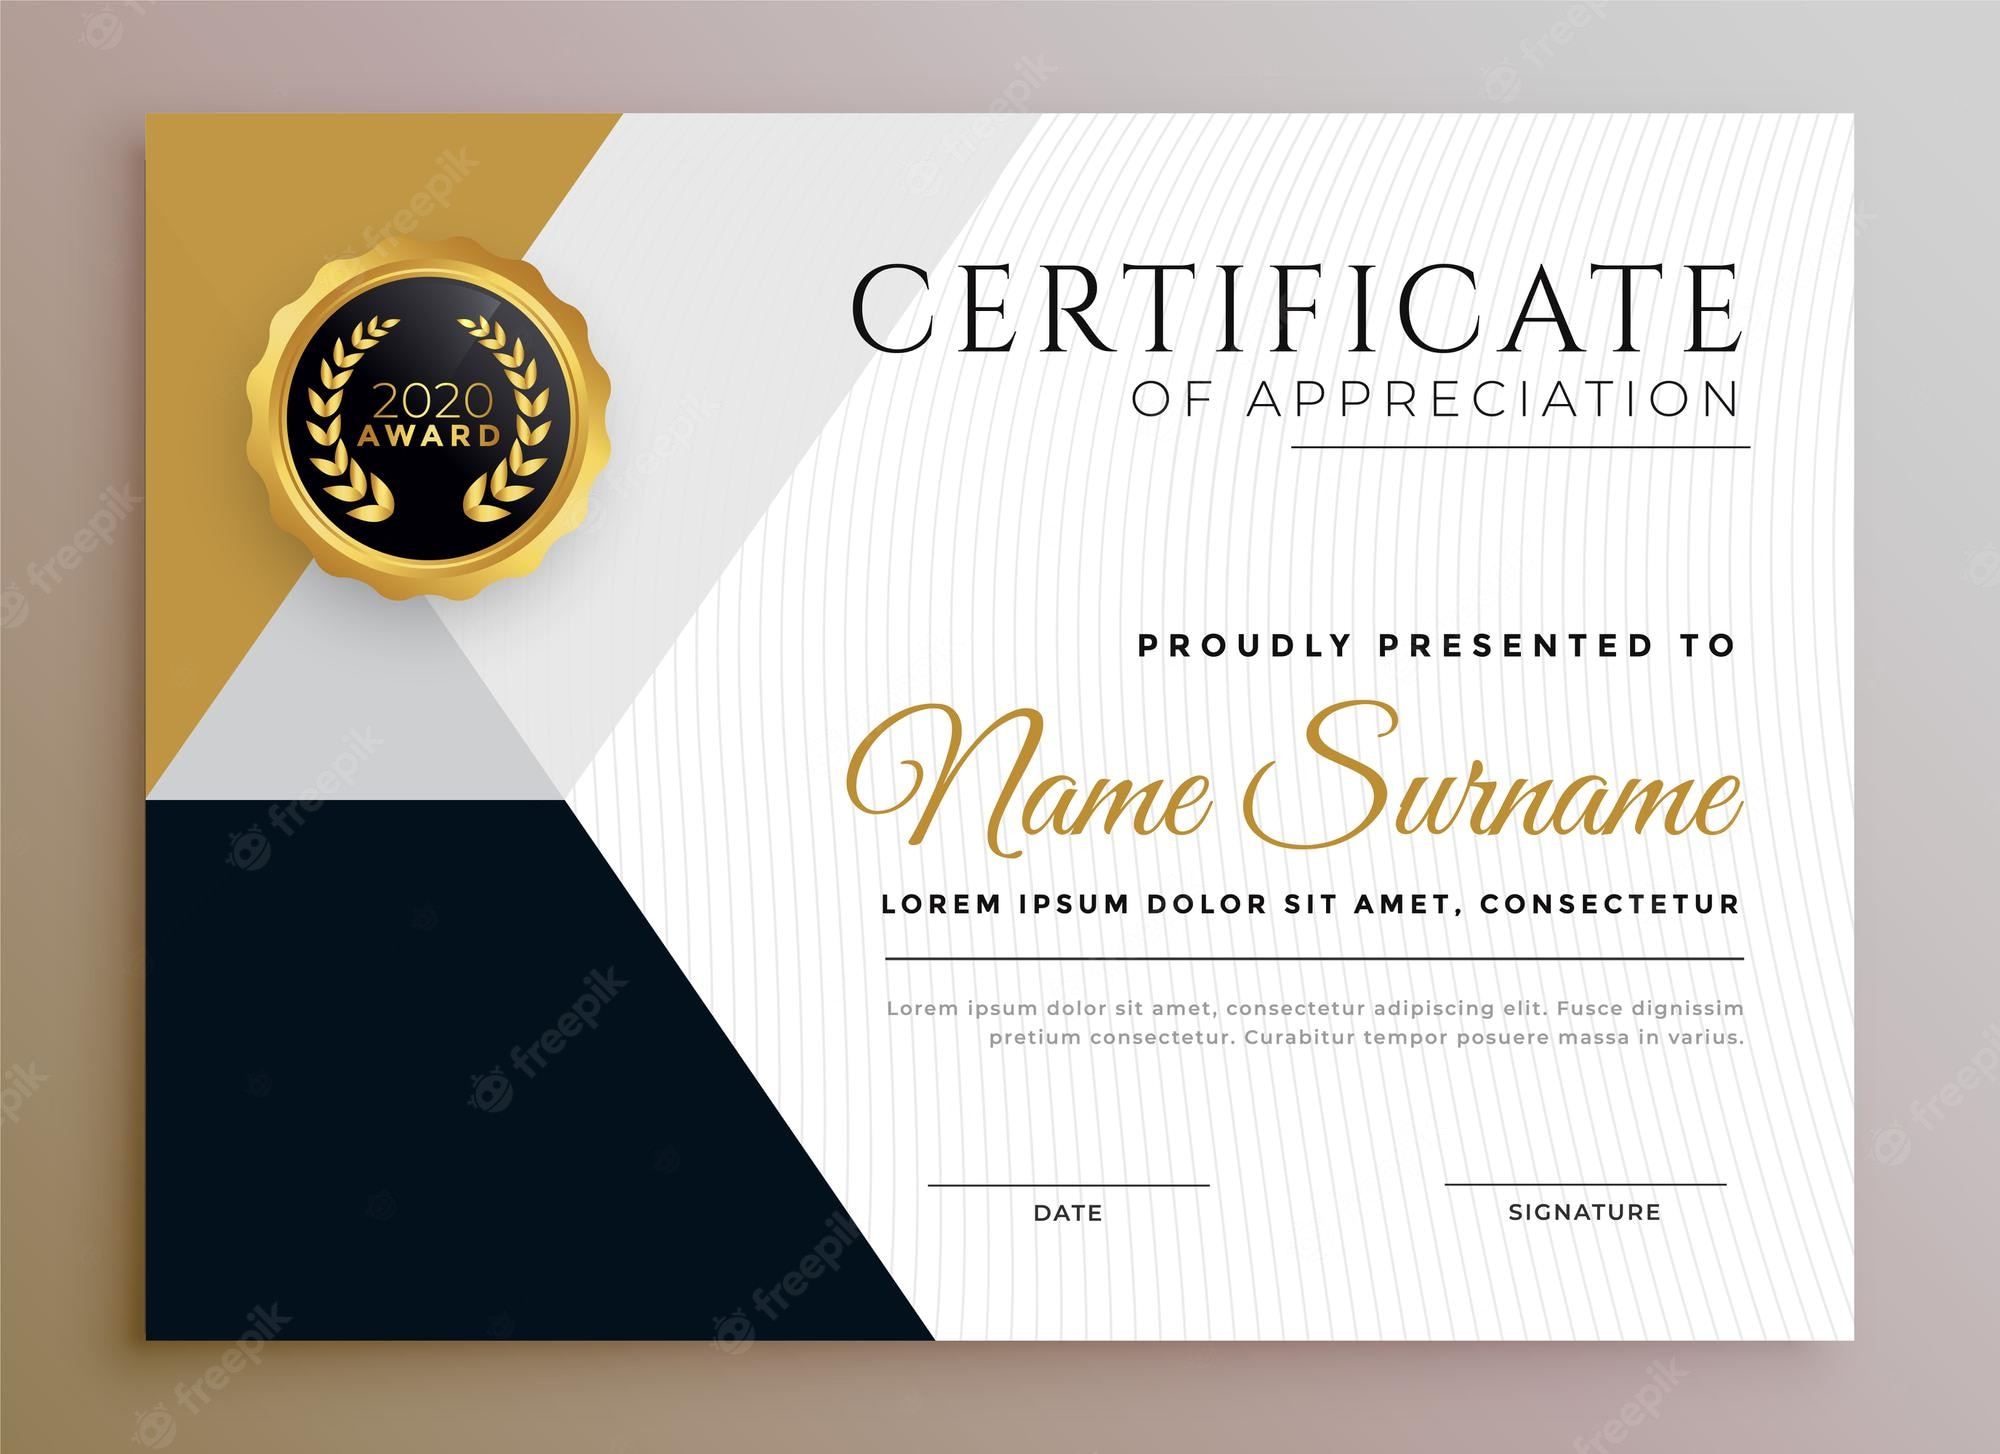 Certificate Images - Free Download on Freepik Regarding Certificate Of Excellence Template Free Download